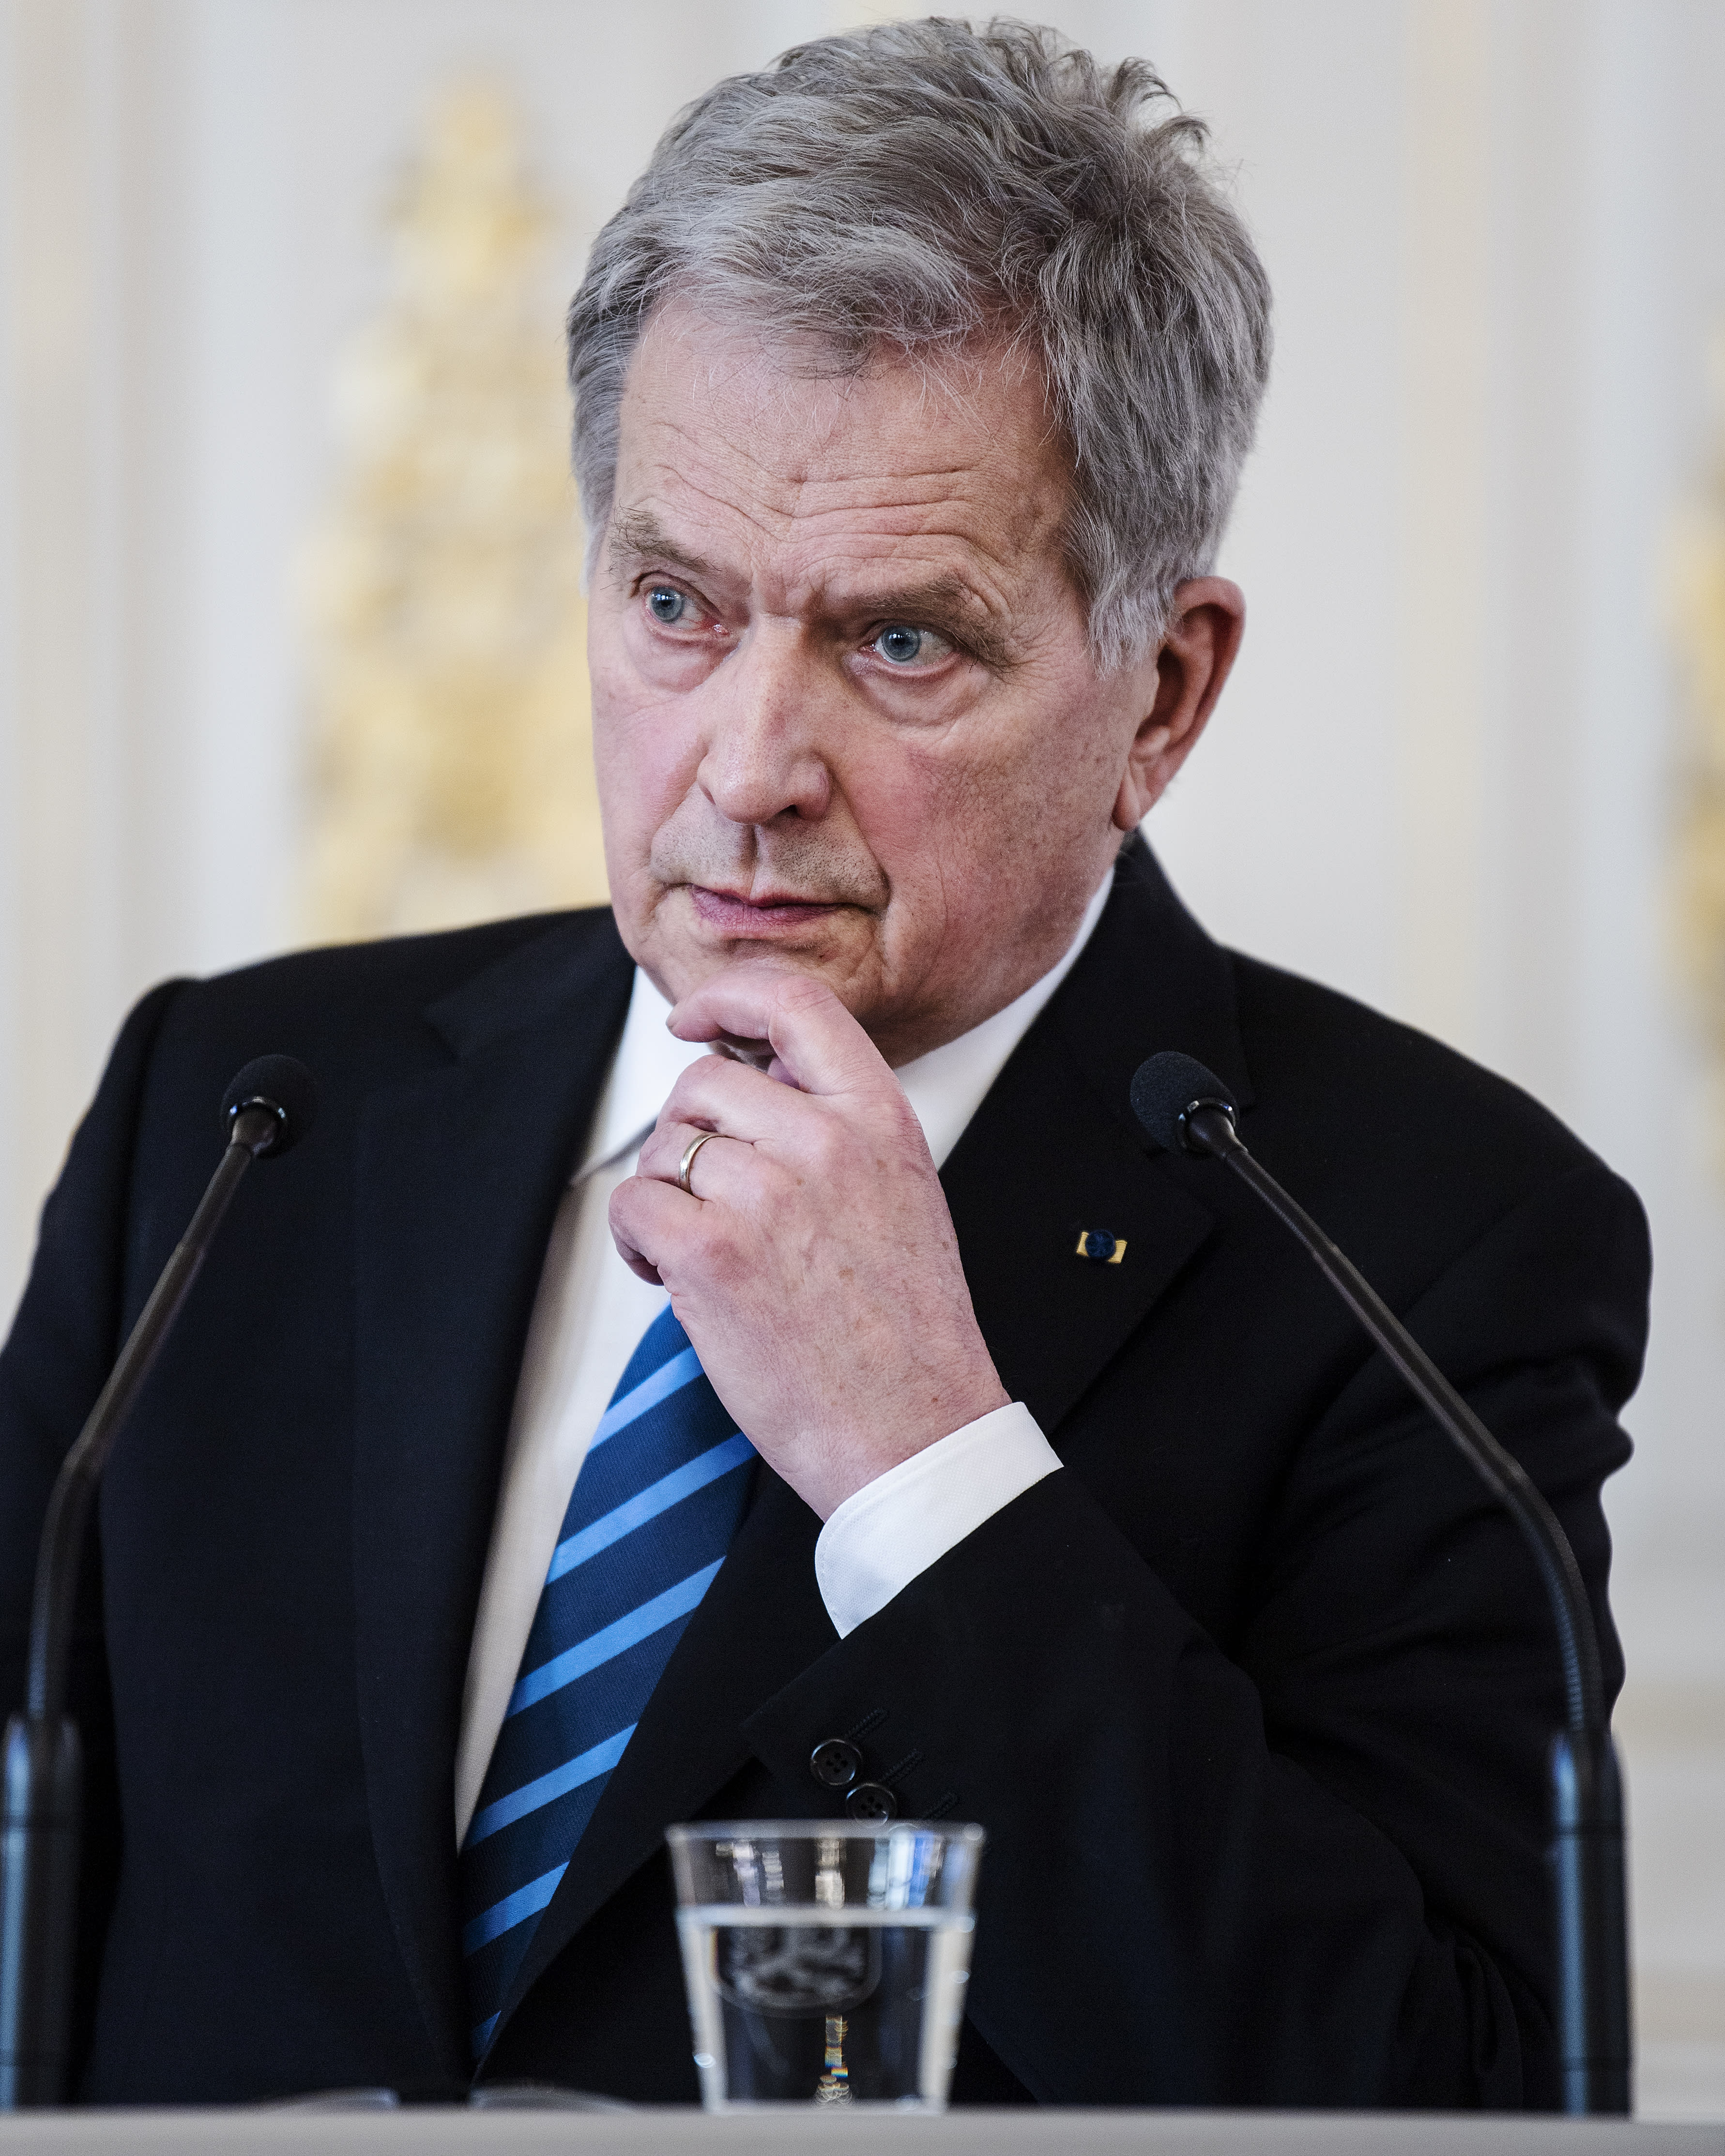 Niinistö is proposing closer defense relations with the United States and Sweden as an alternative to NATO